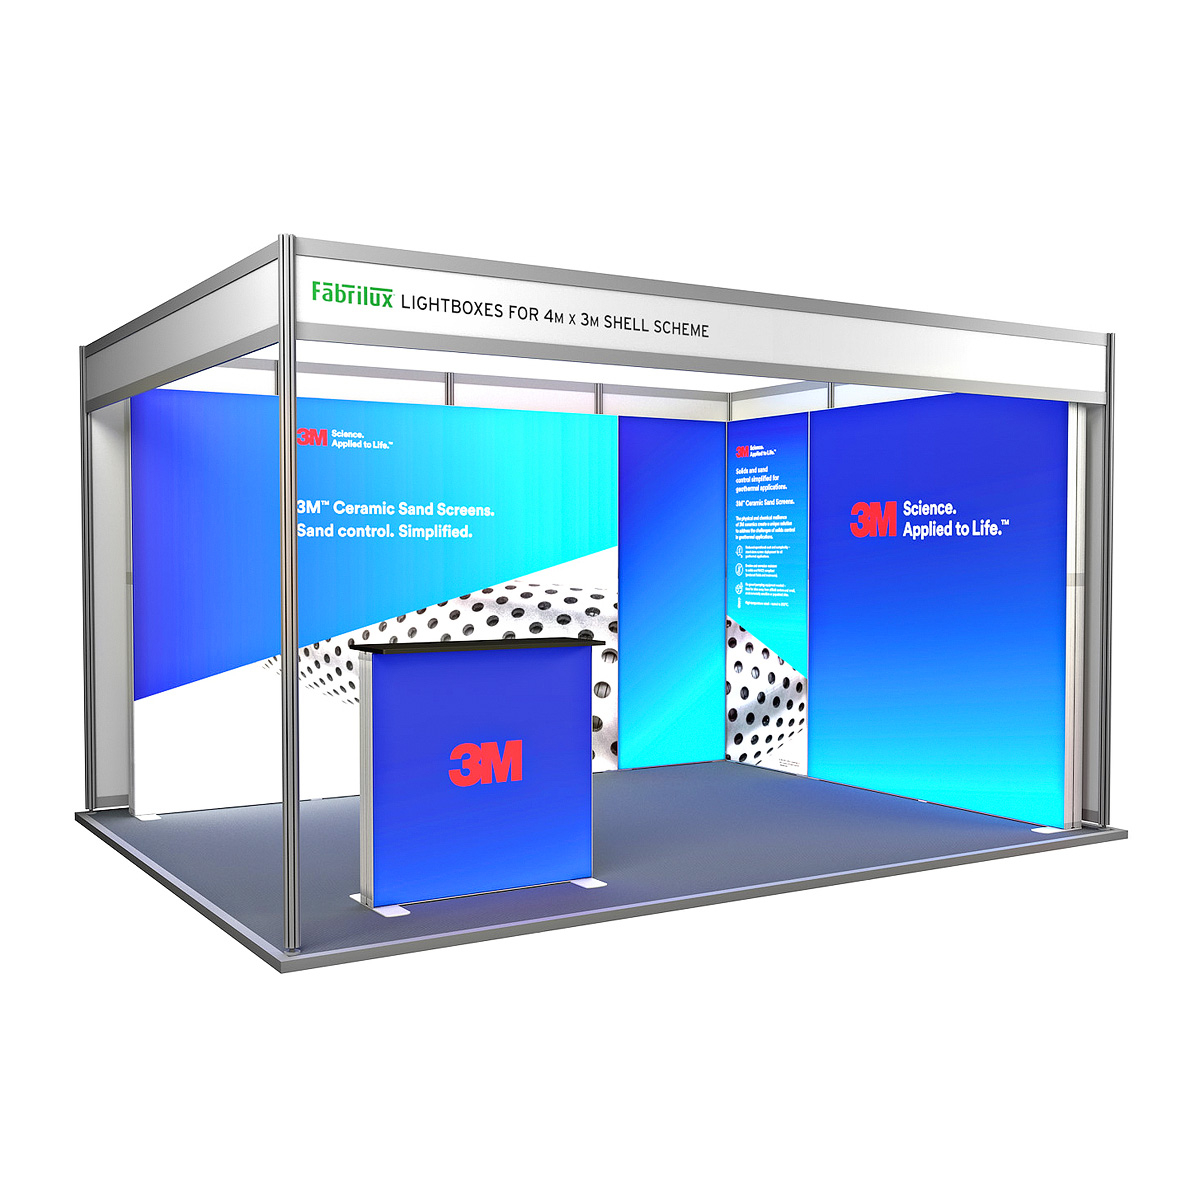 4m x 3m FABRILUX<sup>®</sup> LED Lightboxes Modular Exhibition Stand Shell Scheme